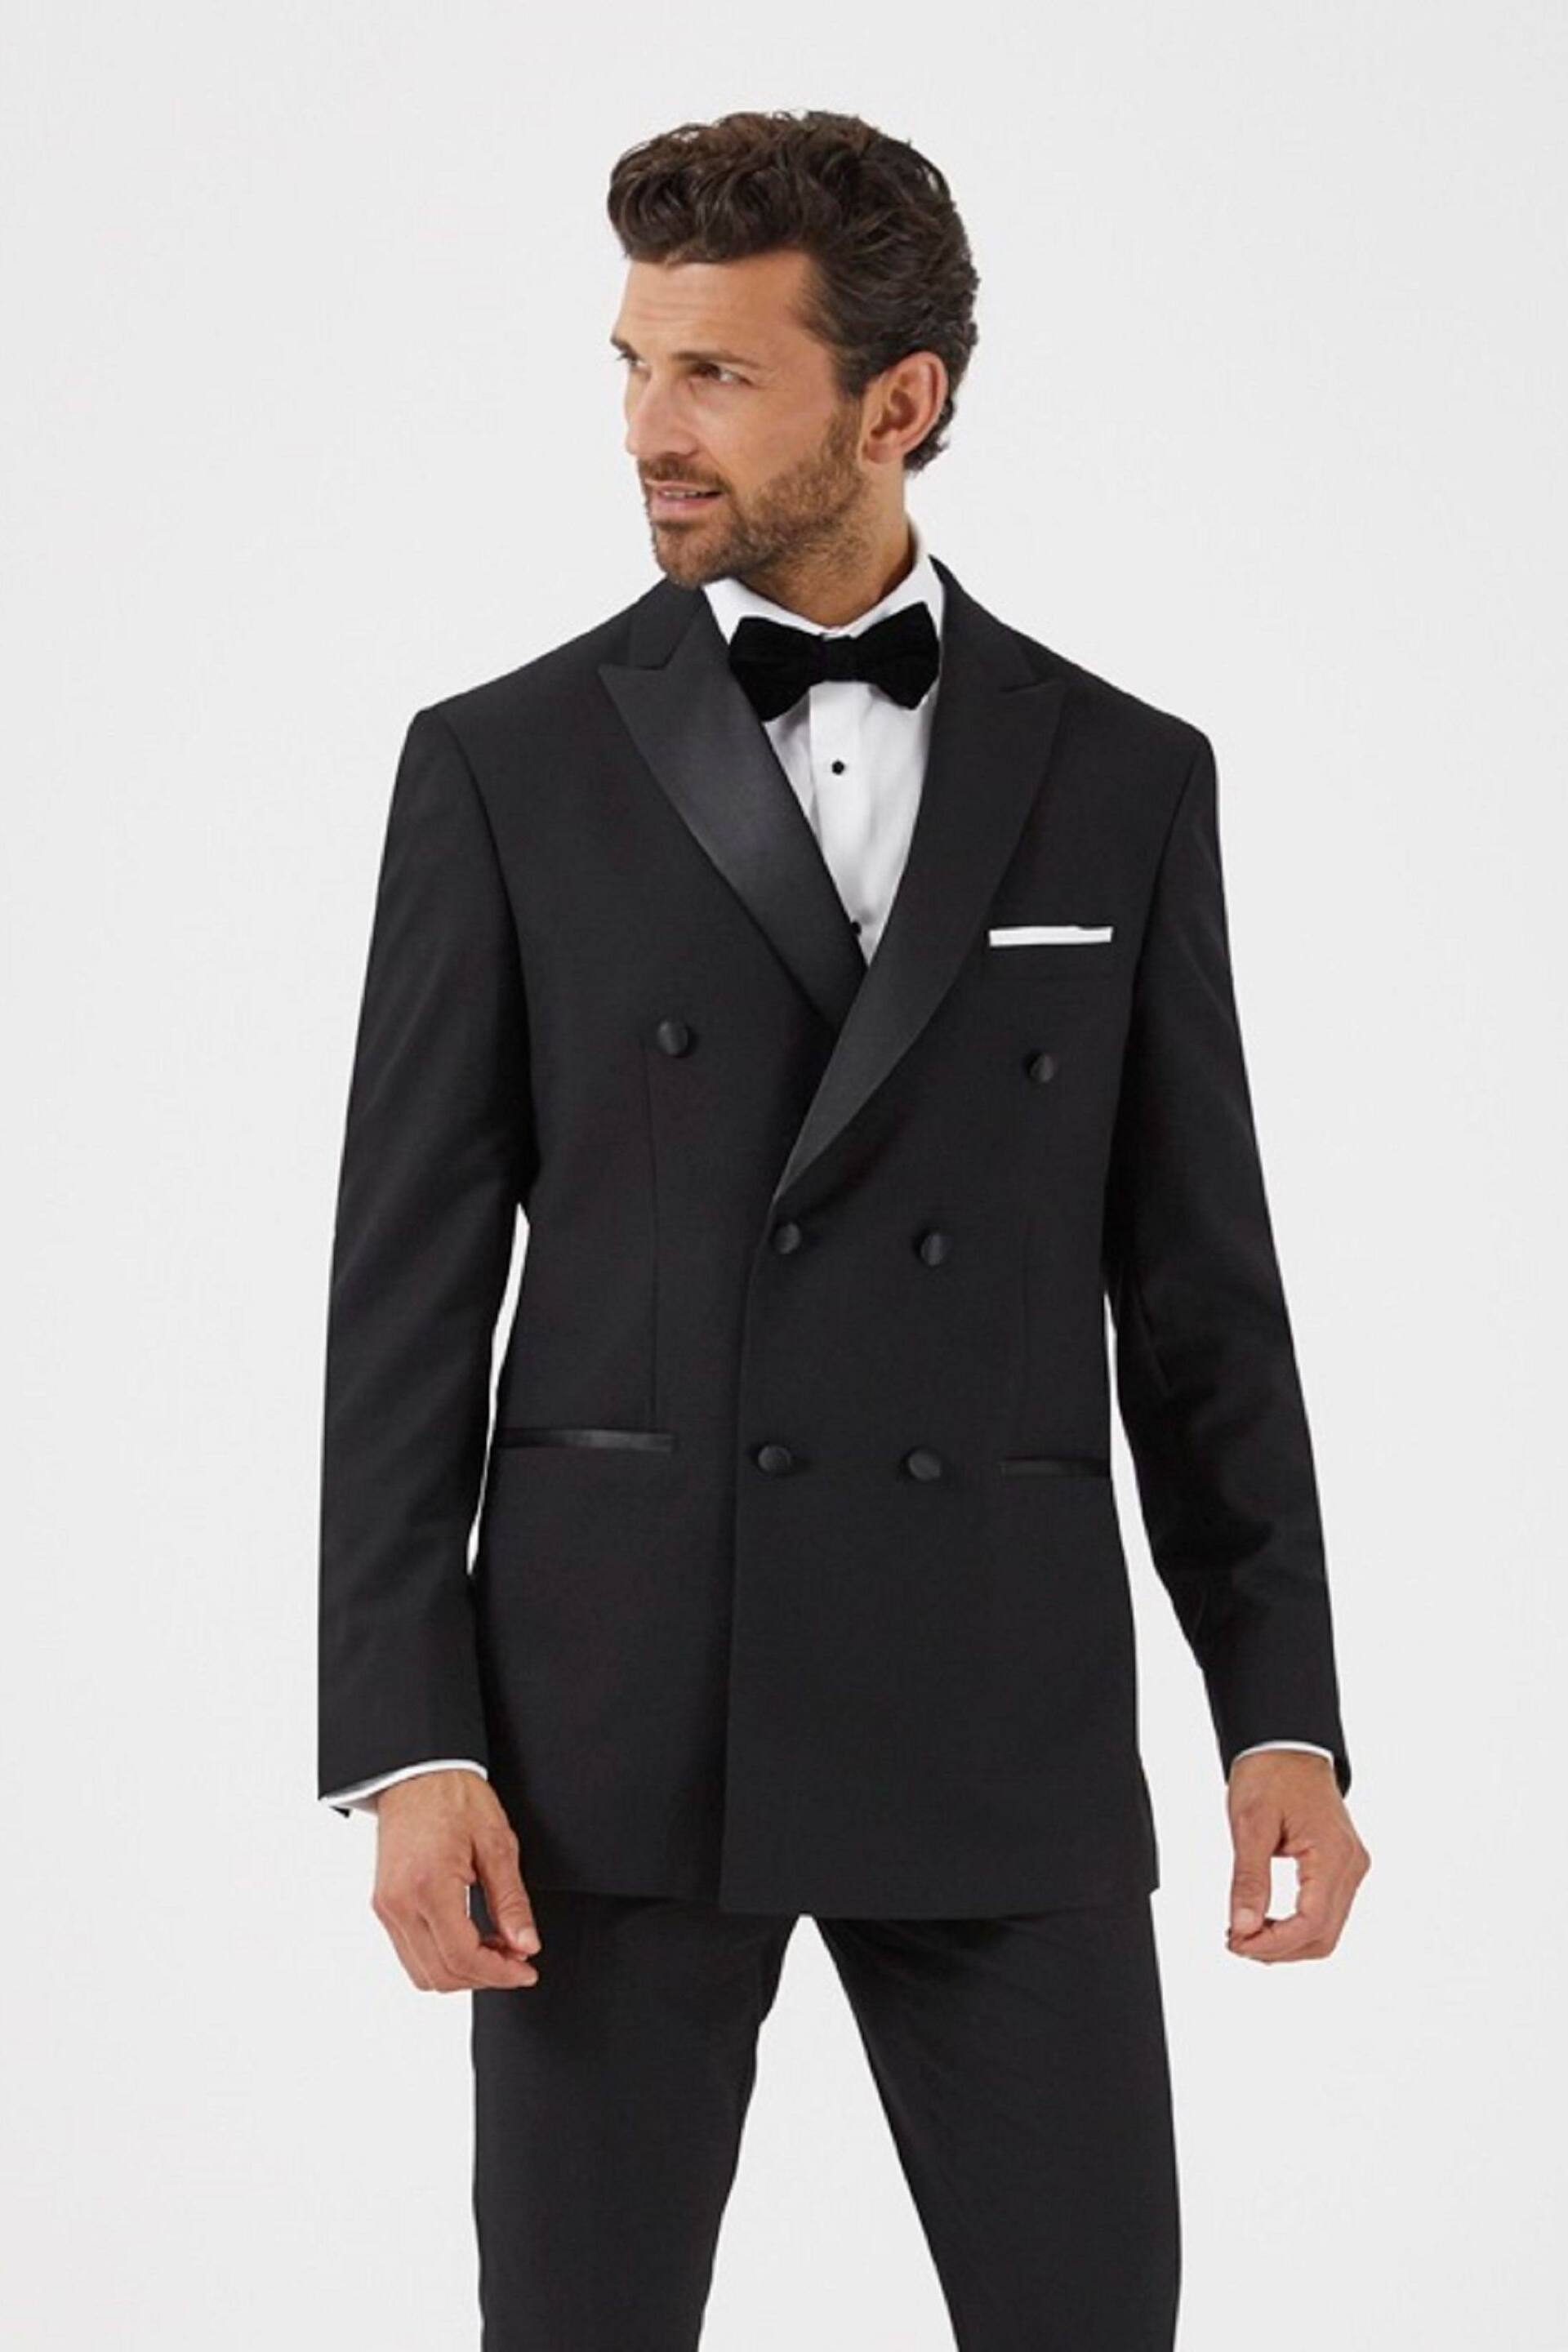 Skopes Sinatra Black Tailored Double Breasted Suit Jacket - Image 1 of 4